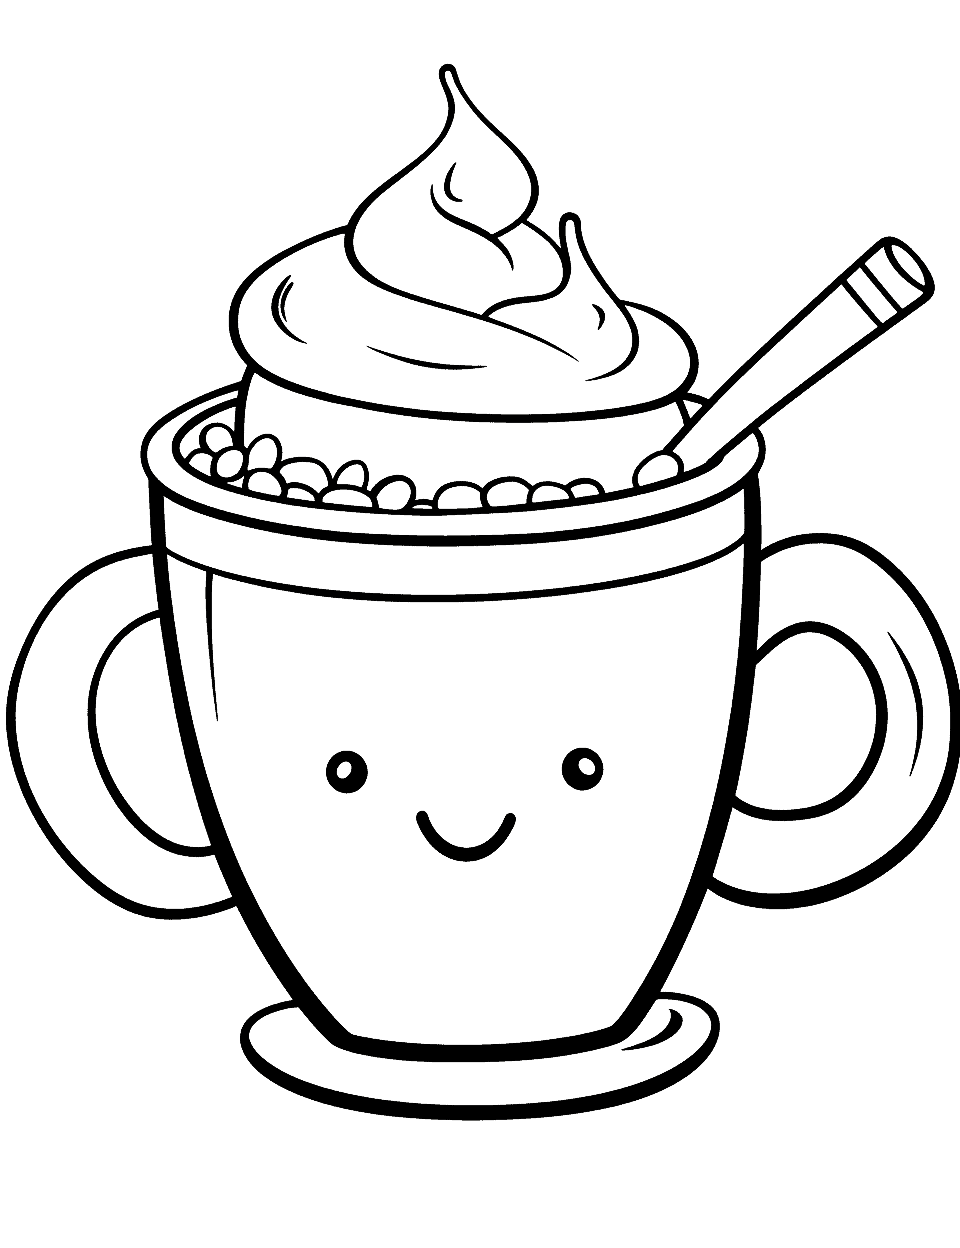 Kawaii Cup of Hot Chocolate Cute Coloring Page - A cute cup of hot chocolate with a whipped cream smiley face.